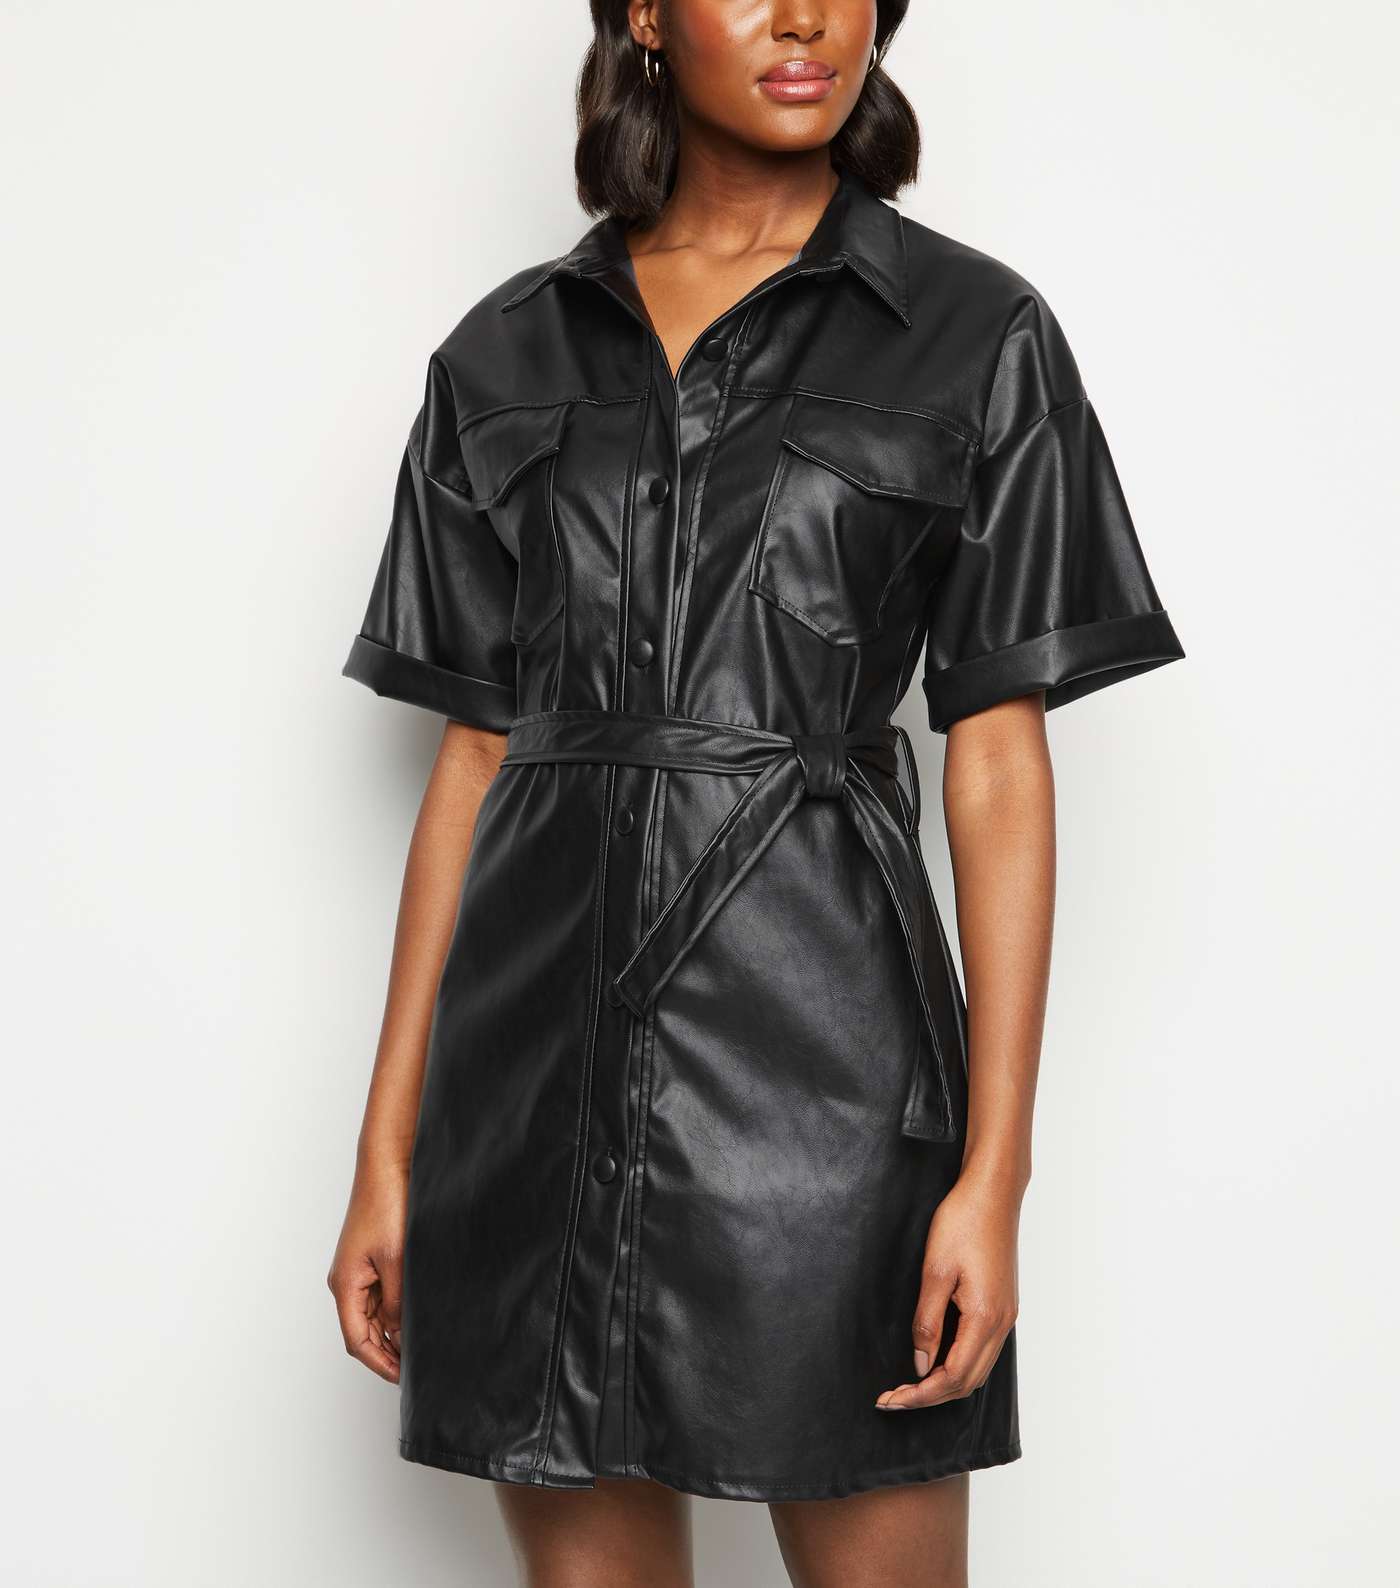 Cameo Rose Black Leather-Look Utility Shirt Dress